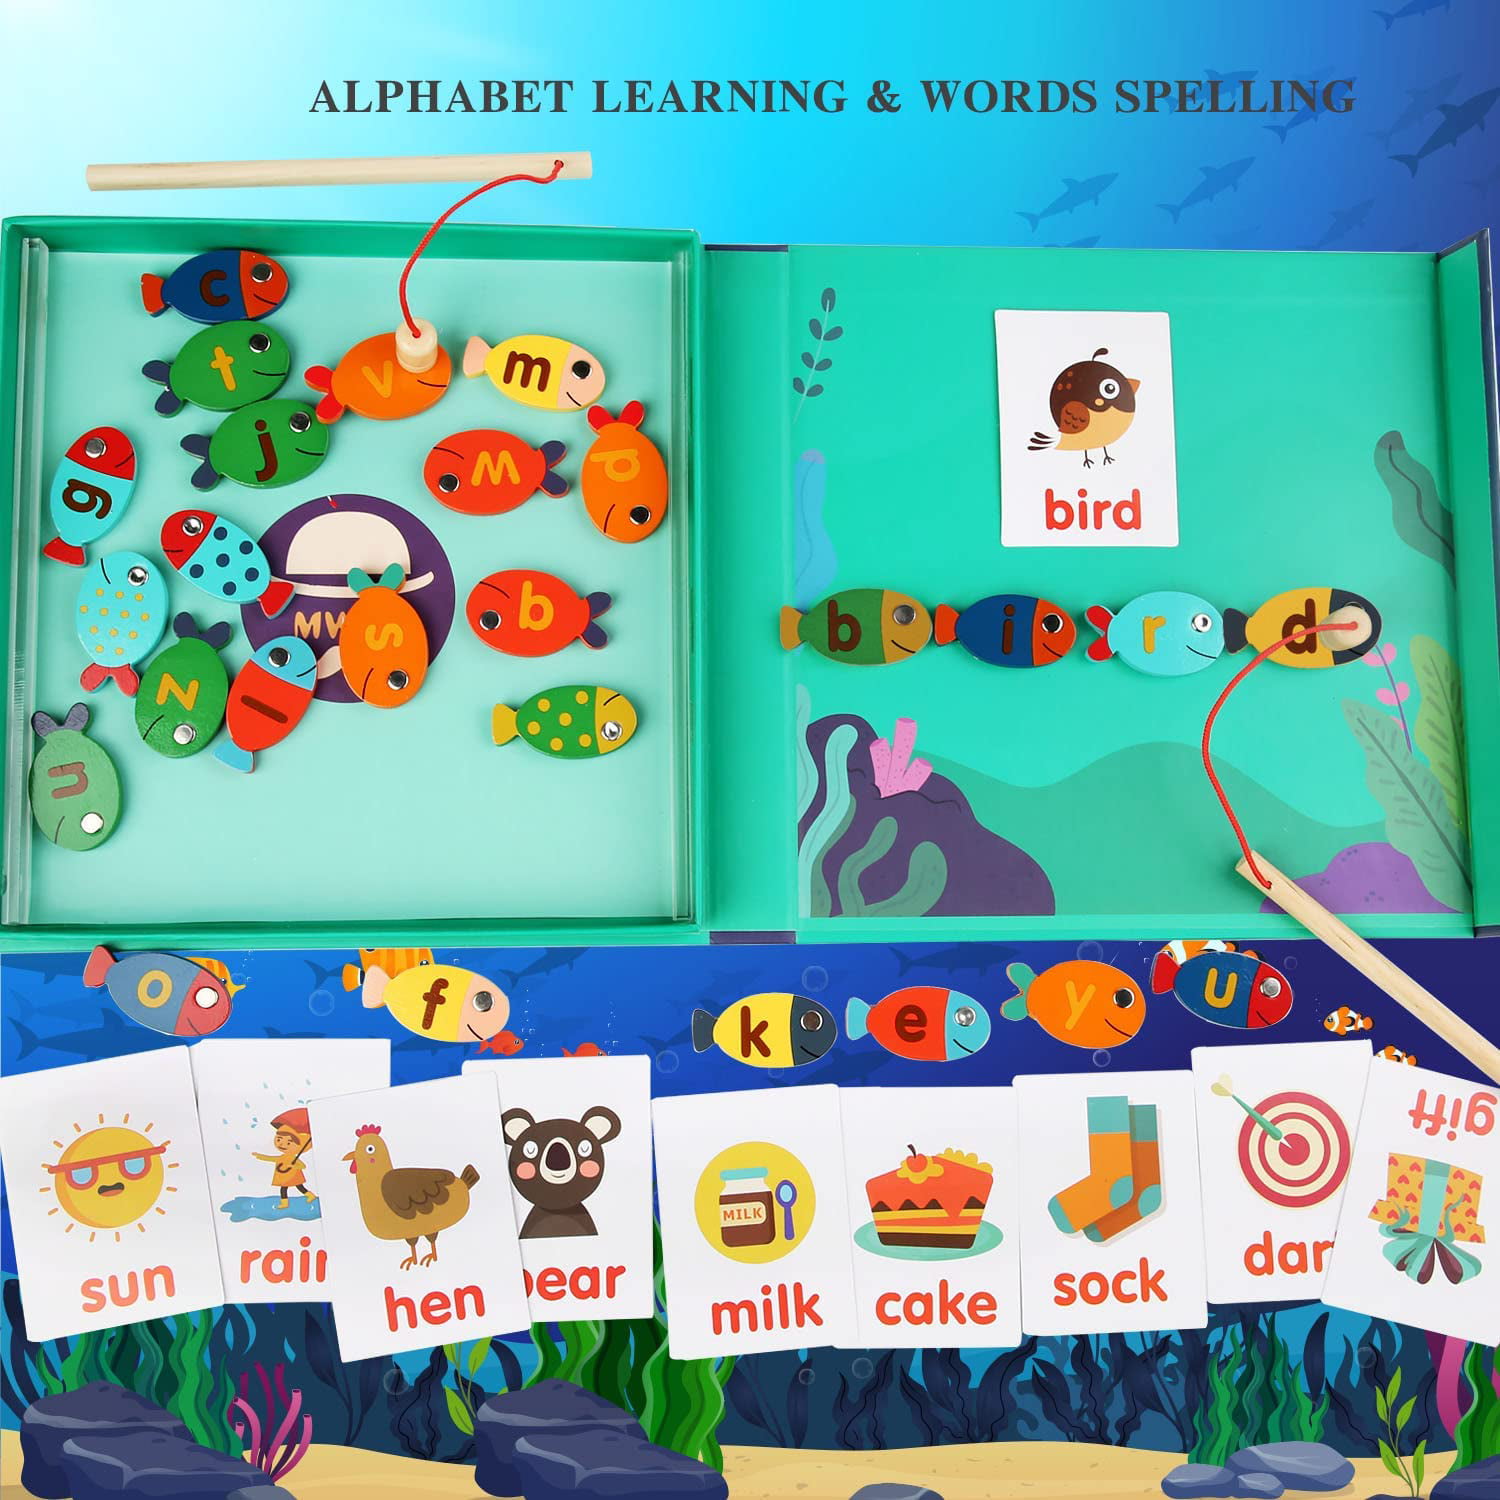 Magnetic Fishing Game - ABC Learning for Toddlers with Wood Toy